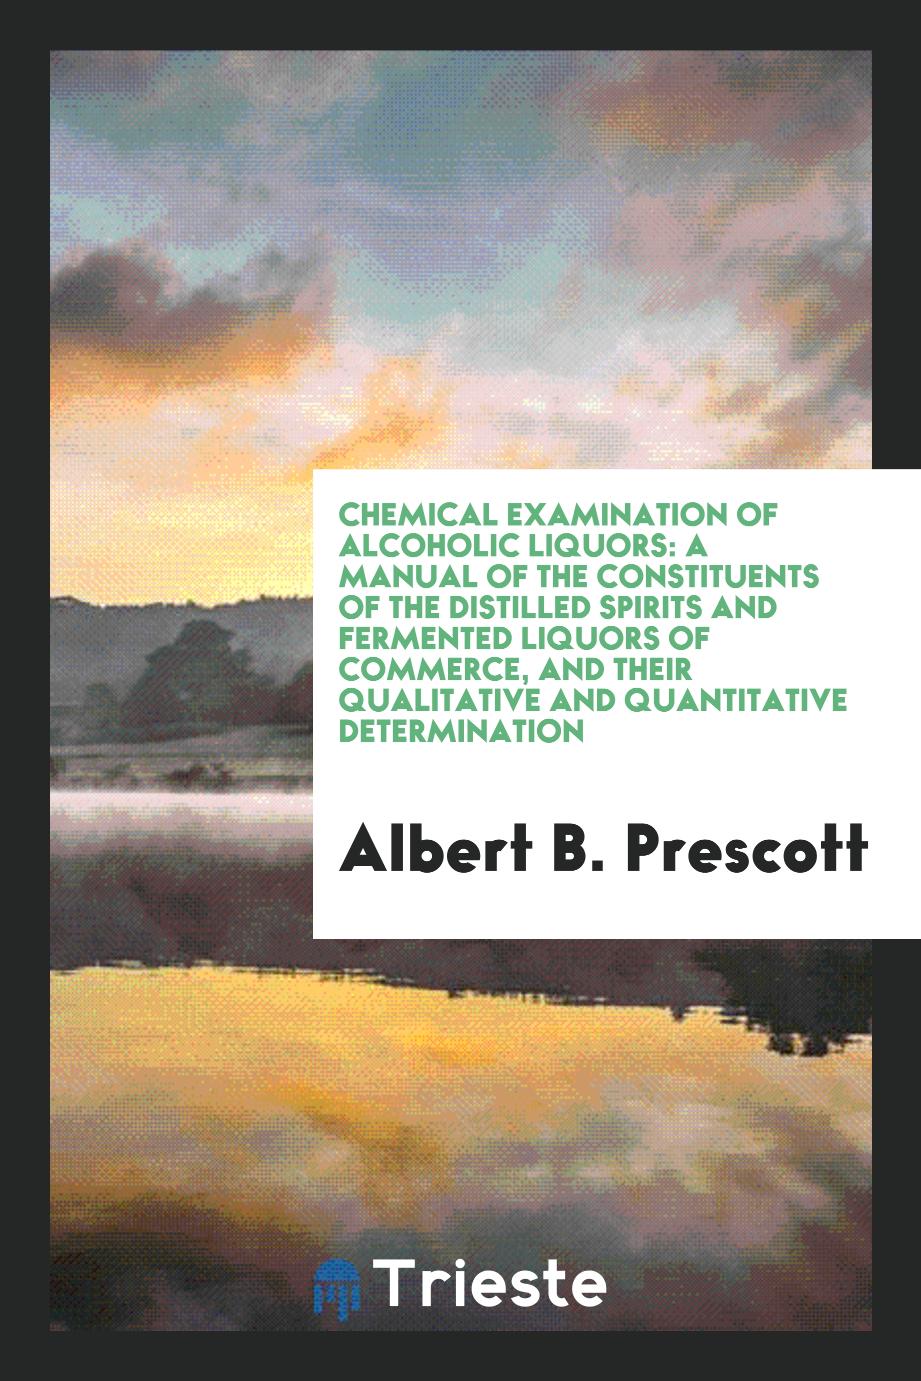 Chemical Examination of Alcoholic Liquors: A Manual of the Constituents of the Distilled Spirits and Fermented Liquors of Commerce, and Their Qualitative and Quantitative Determination